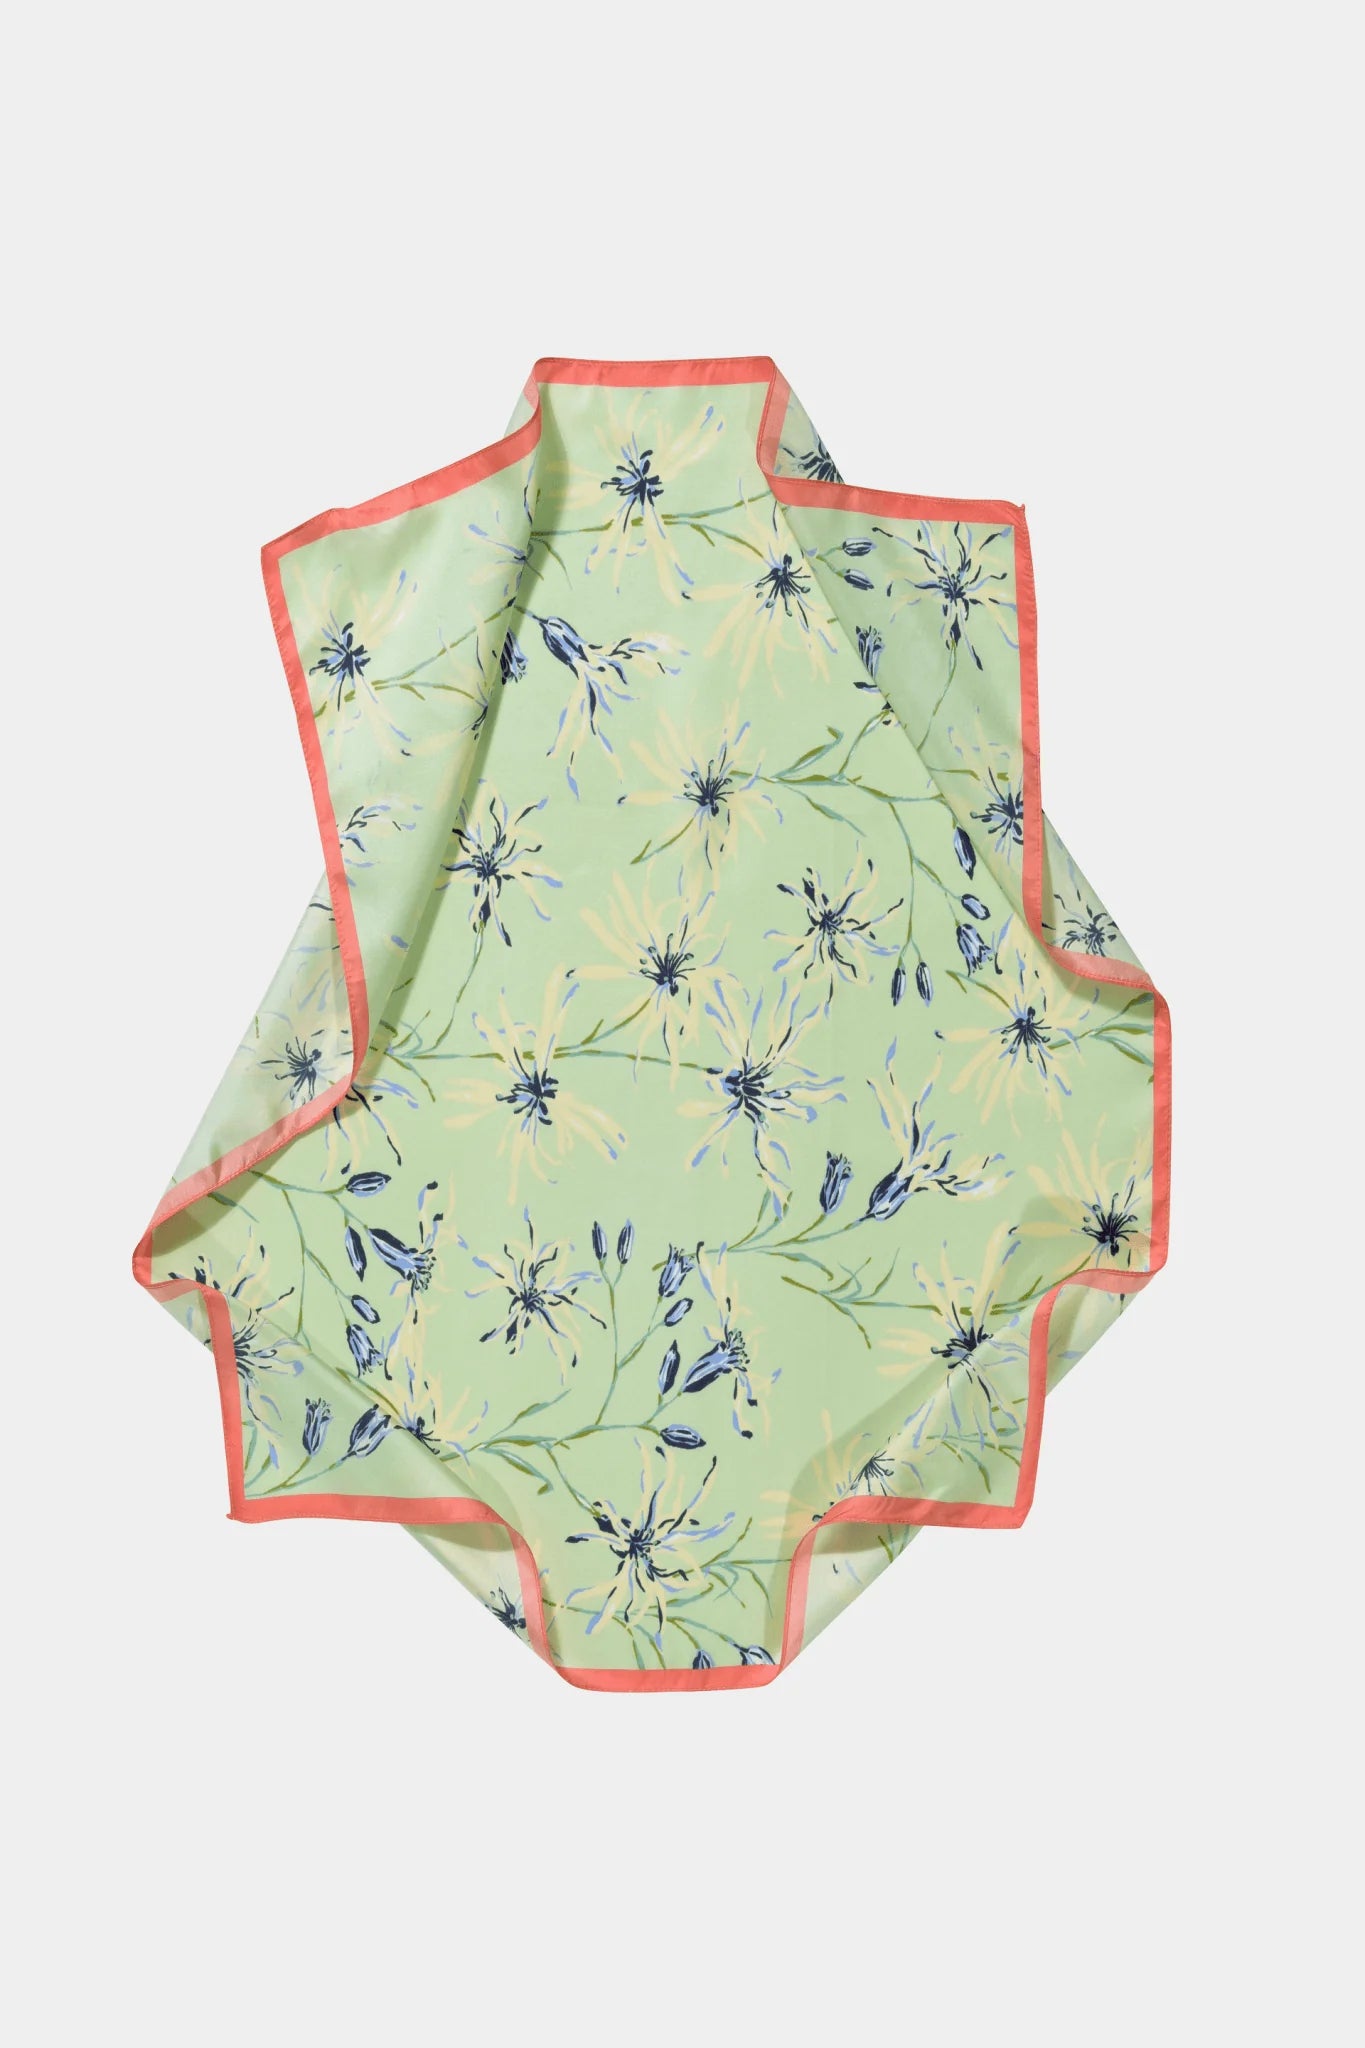 Epice Sprout Wild Orchid Silk Bandana